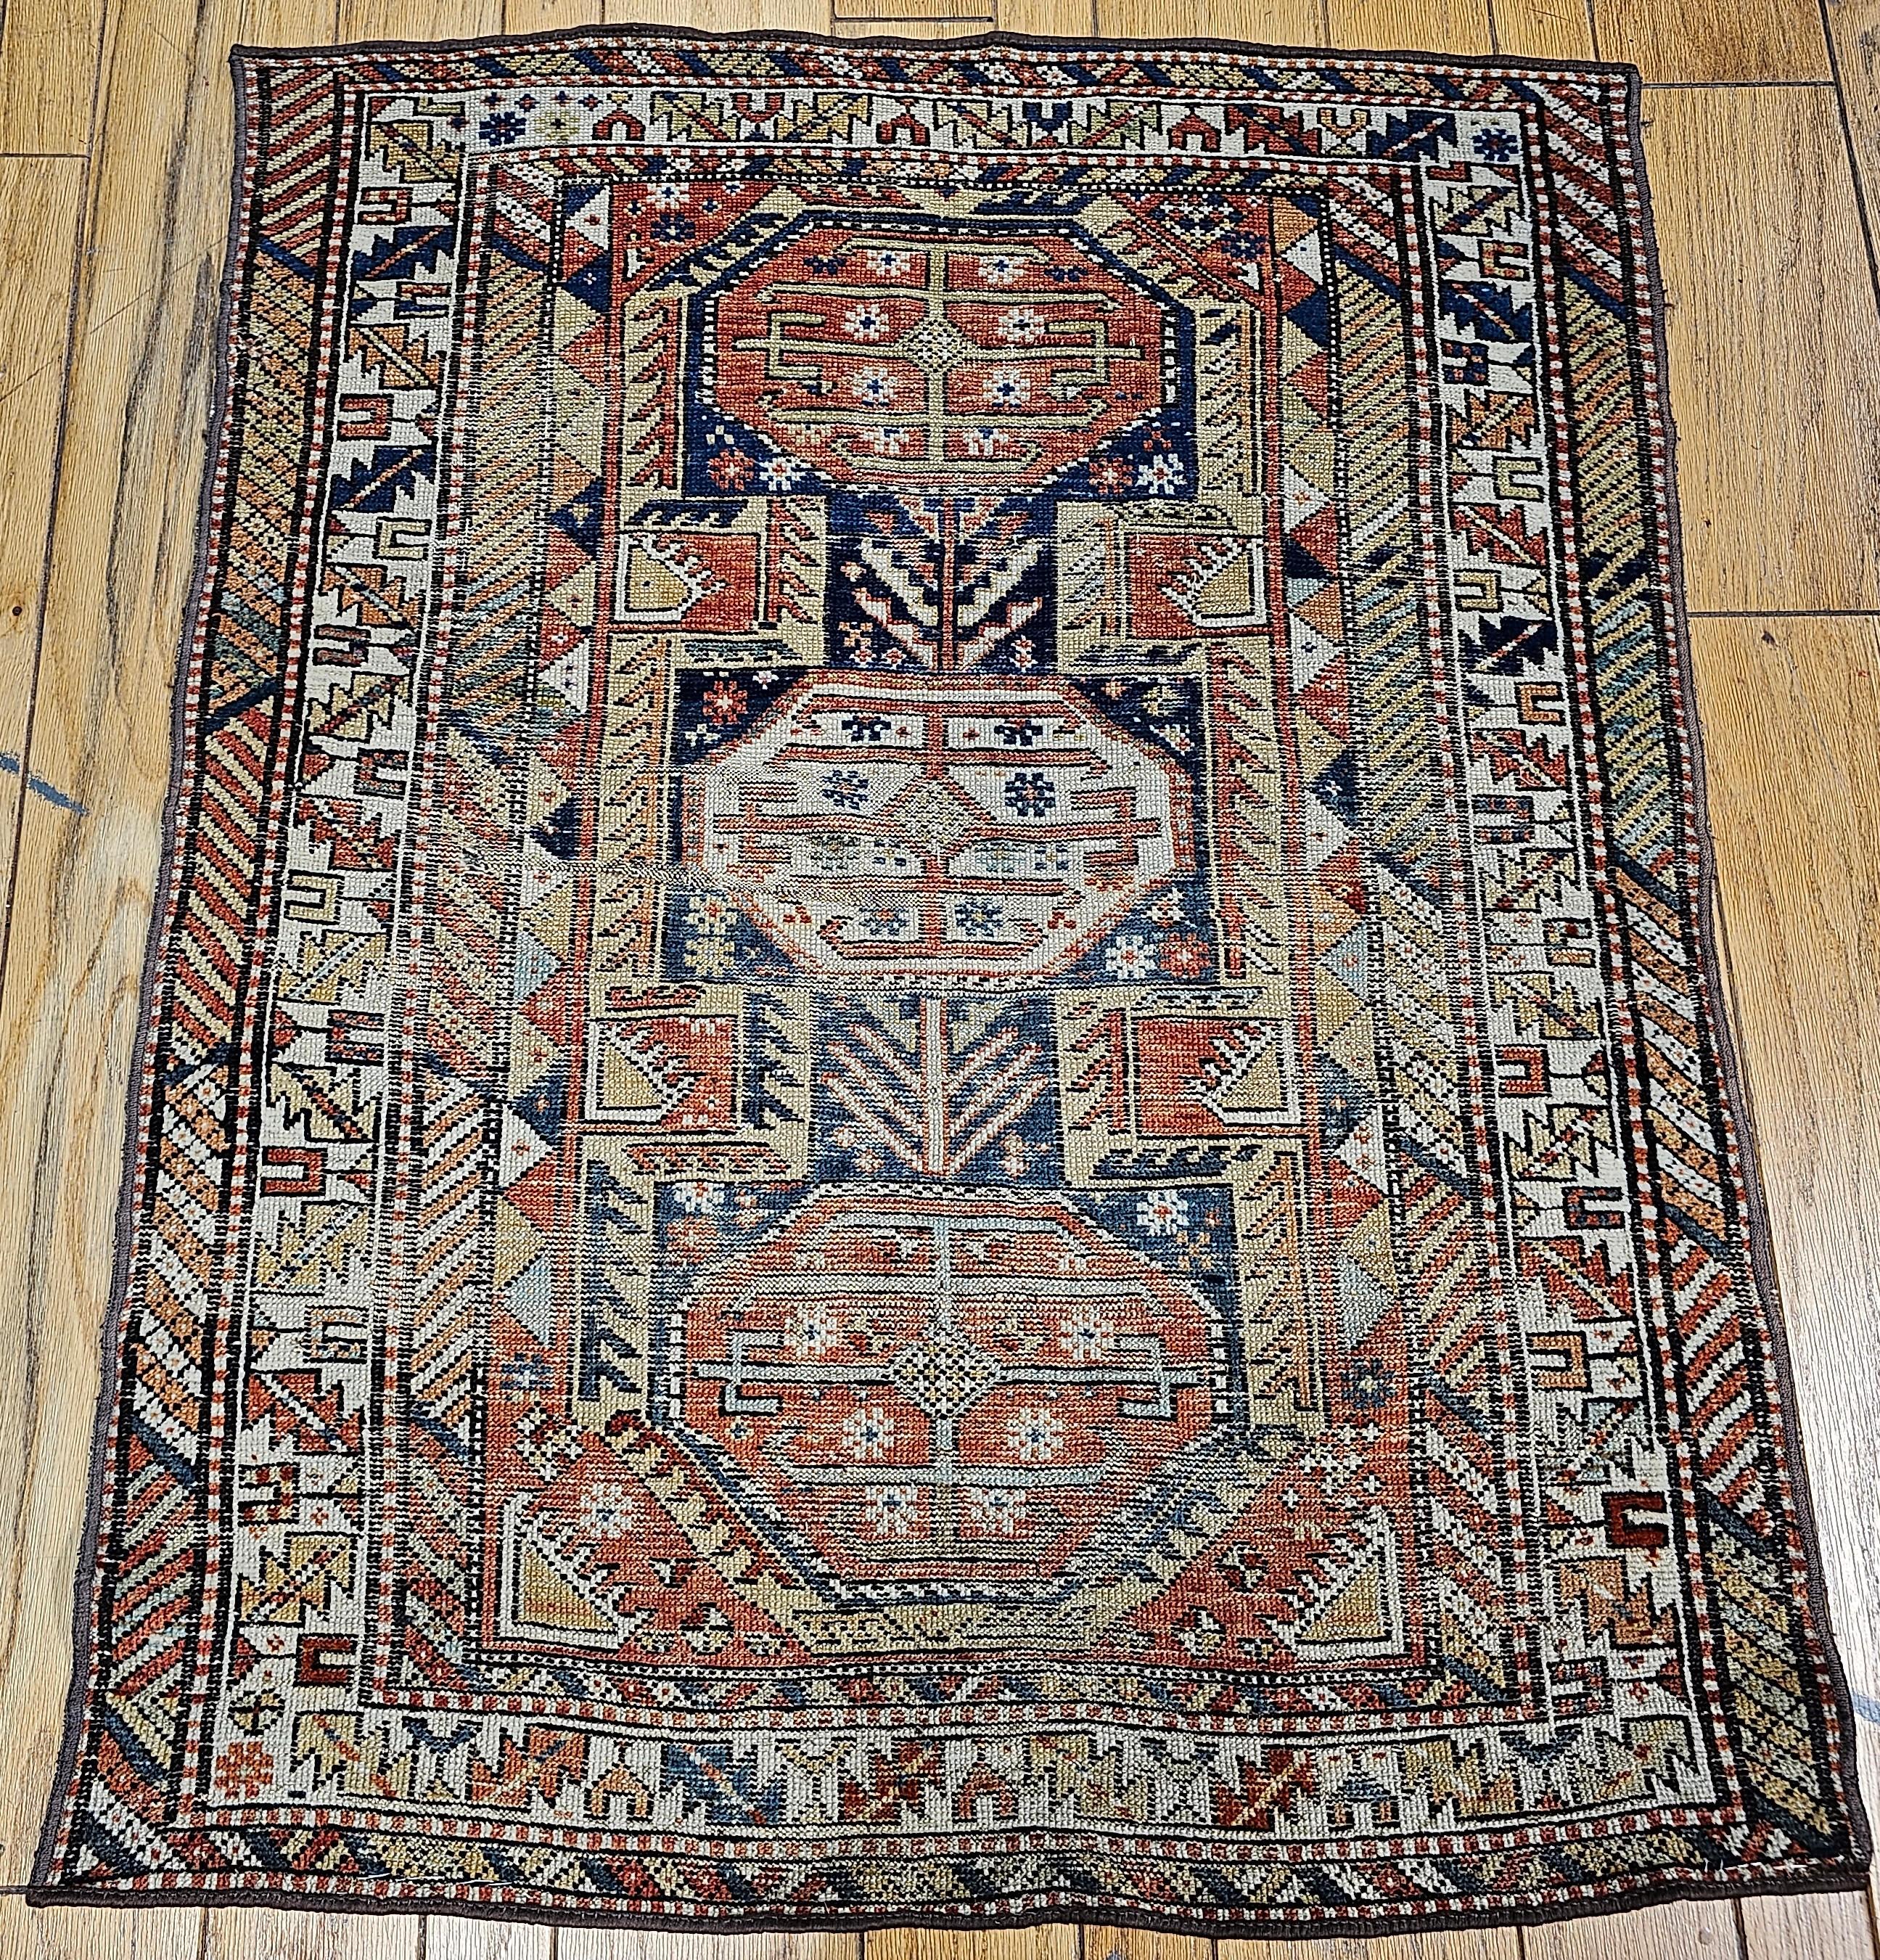 A beautiful Caucasian Shirvan area rug from the southern Azerbaijan region of the Caucasus is in geometric medallion design with an abrash navy blue field.   The Caucasian rug has a triple medallion design in red and ivory set in an abrash